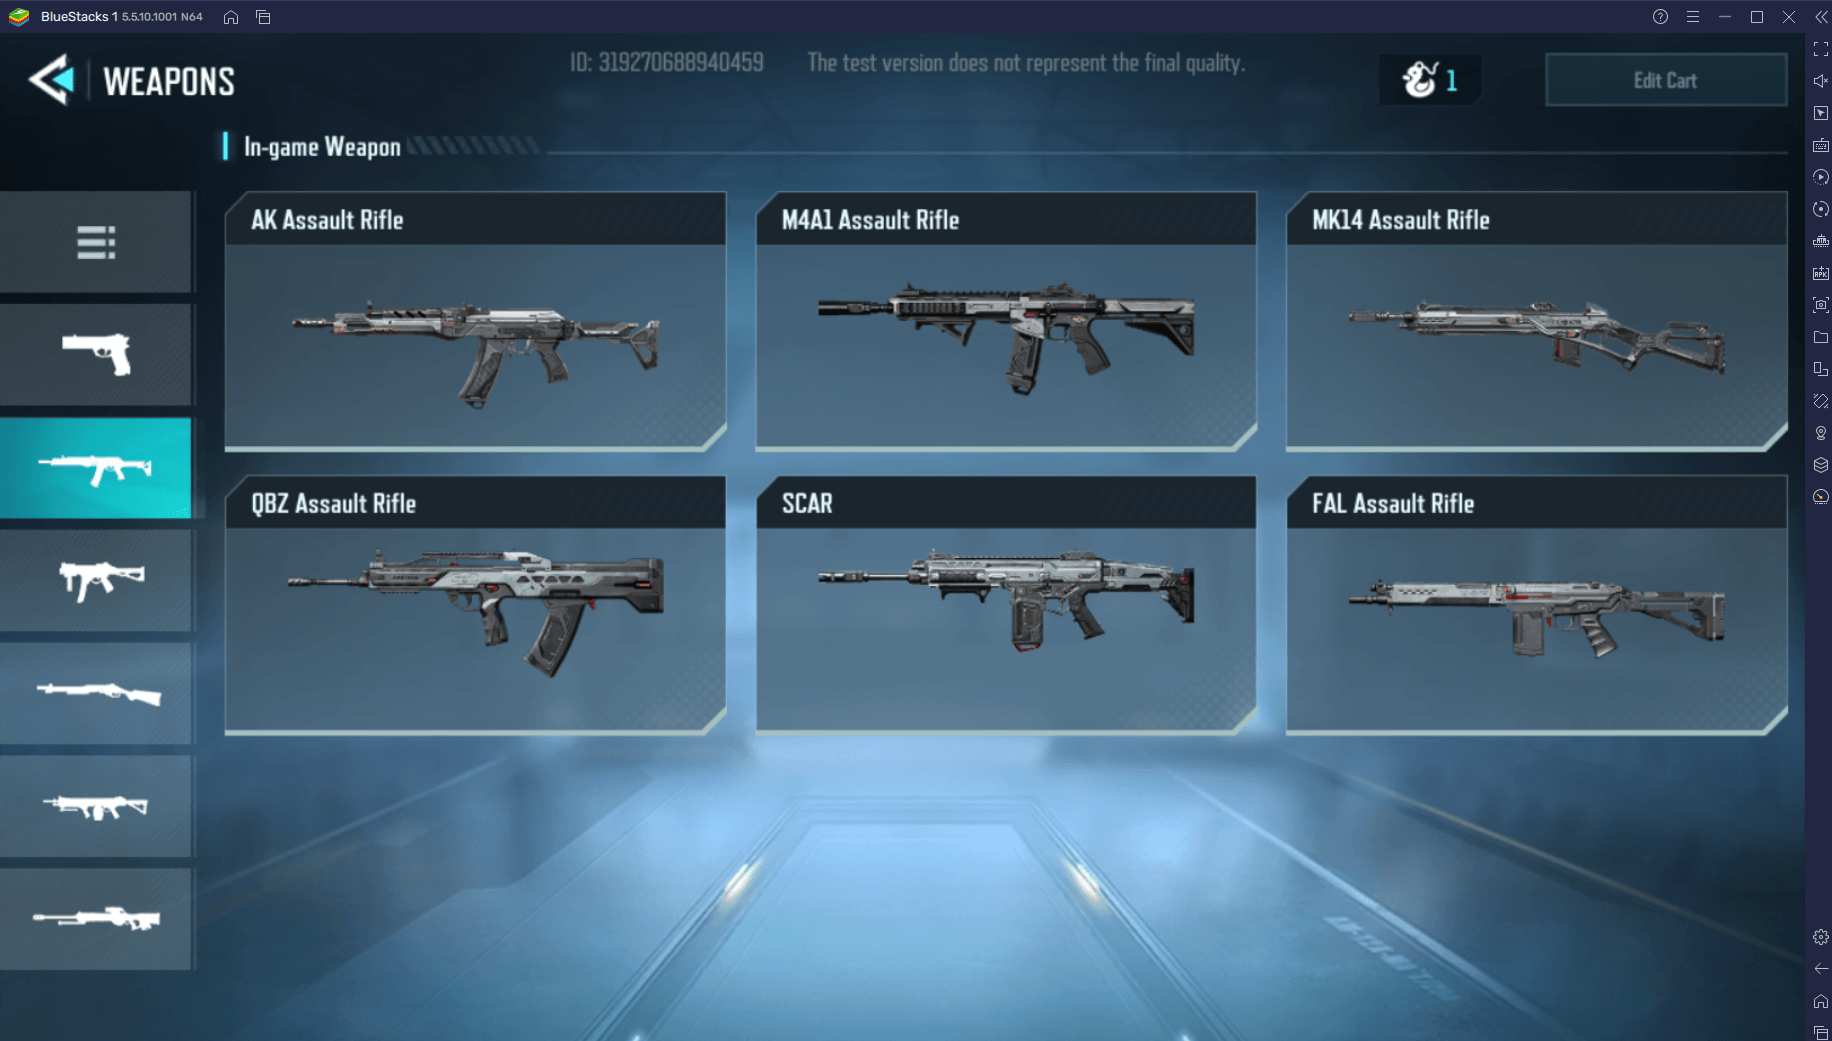 Learn all about Hyper Front Assault Rifles and choose the weapon that best suits your playstyle